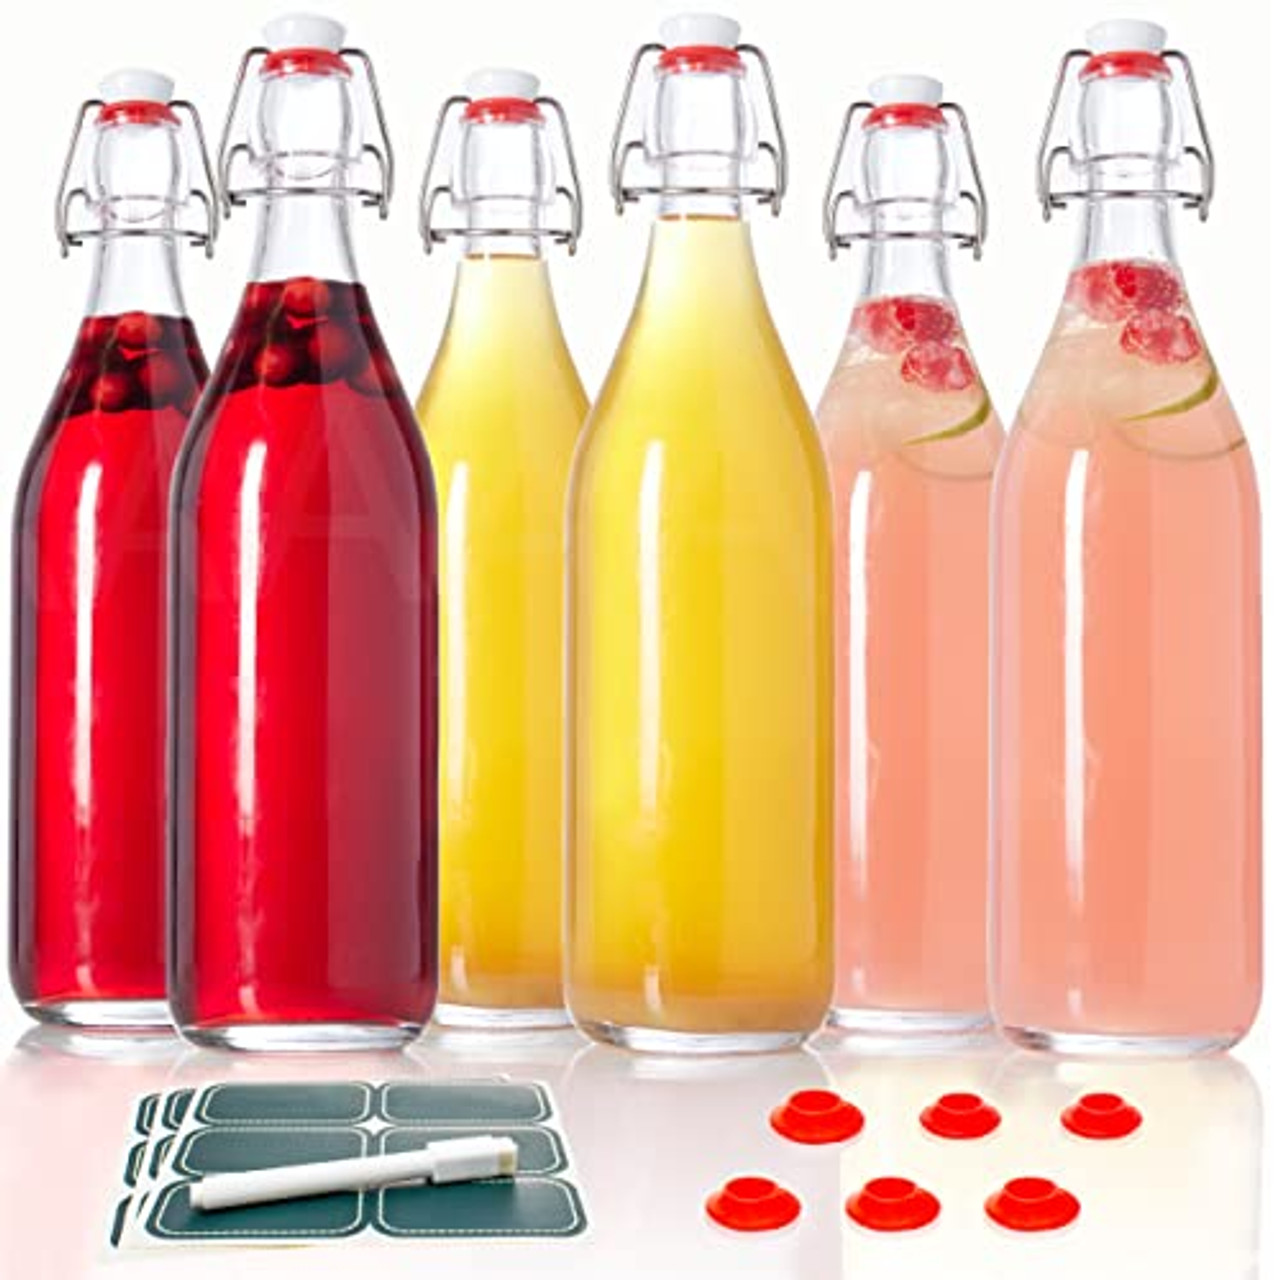 6 Empty Plastic Juice Bottles with Lids, 32oz Juice Drink Containers with  Caps